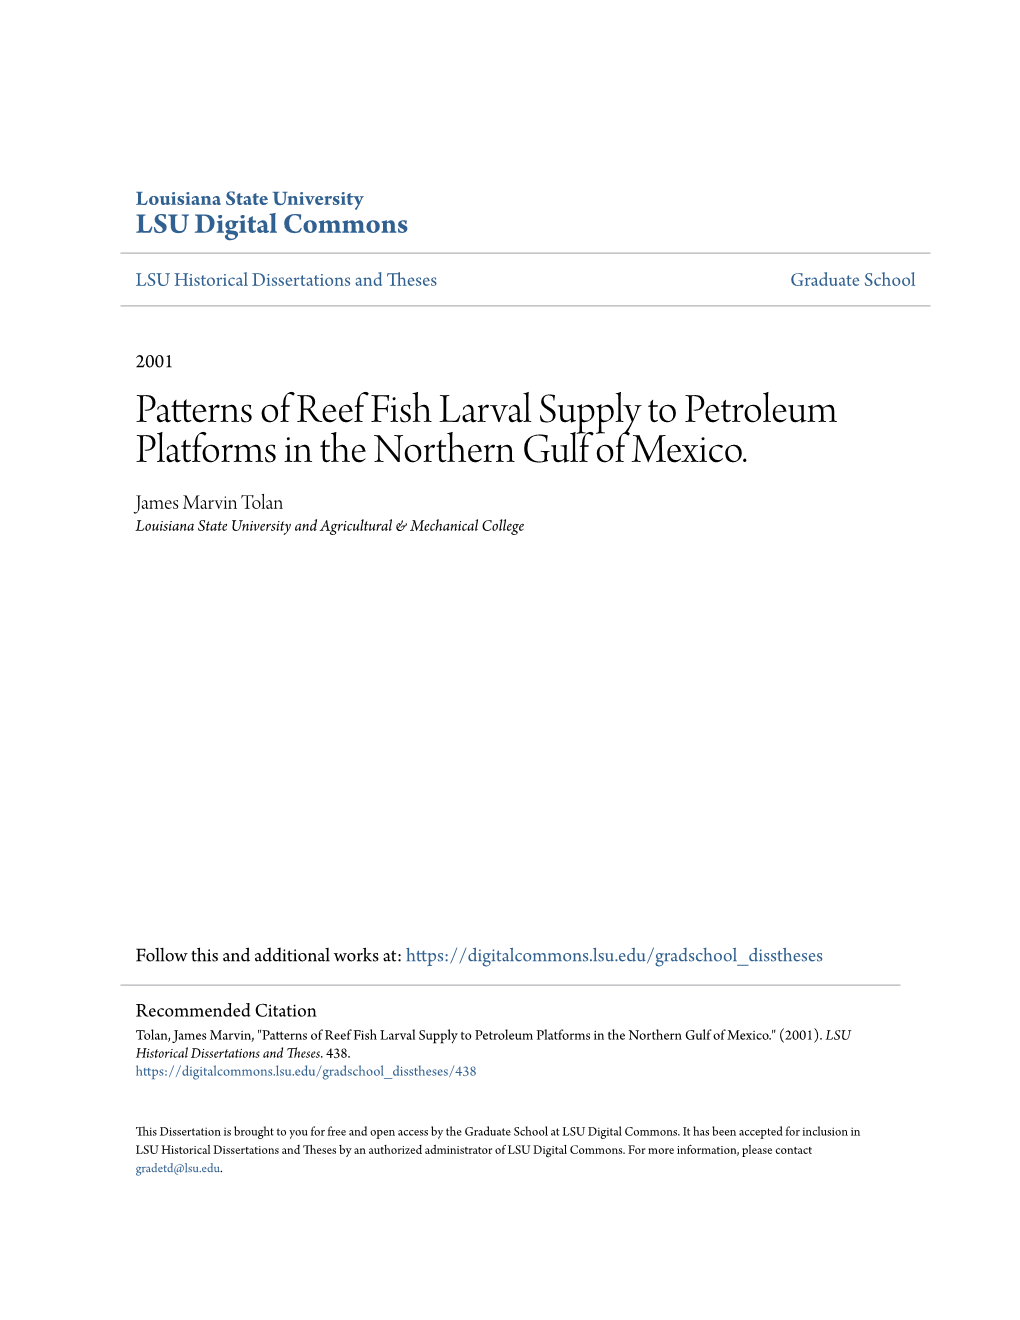 Patterns of Reef Fish Larval Supply to Petroleum Platforms in the Northern Gulf of Mexico